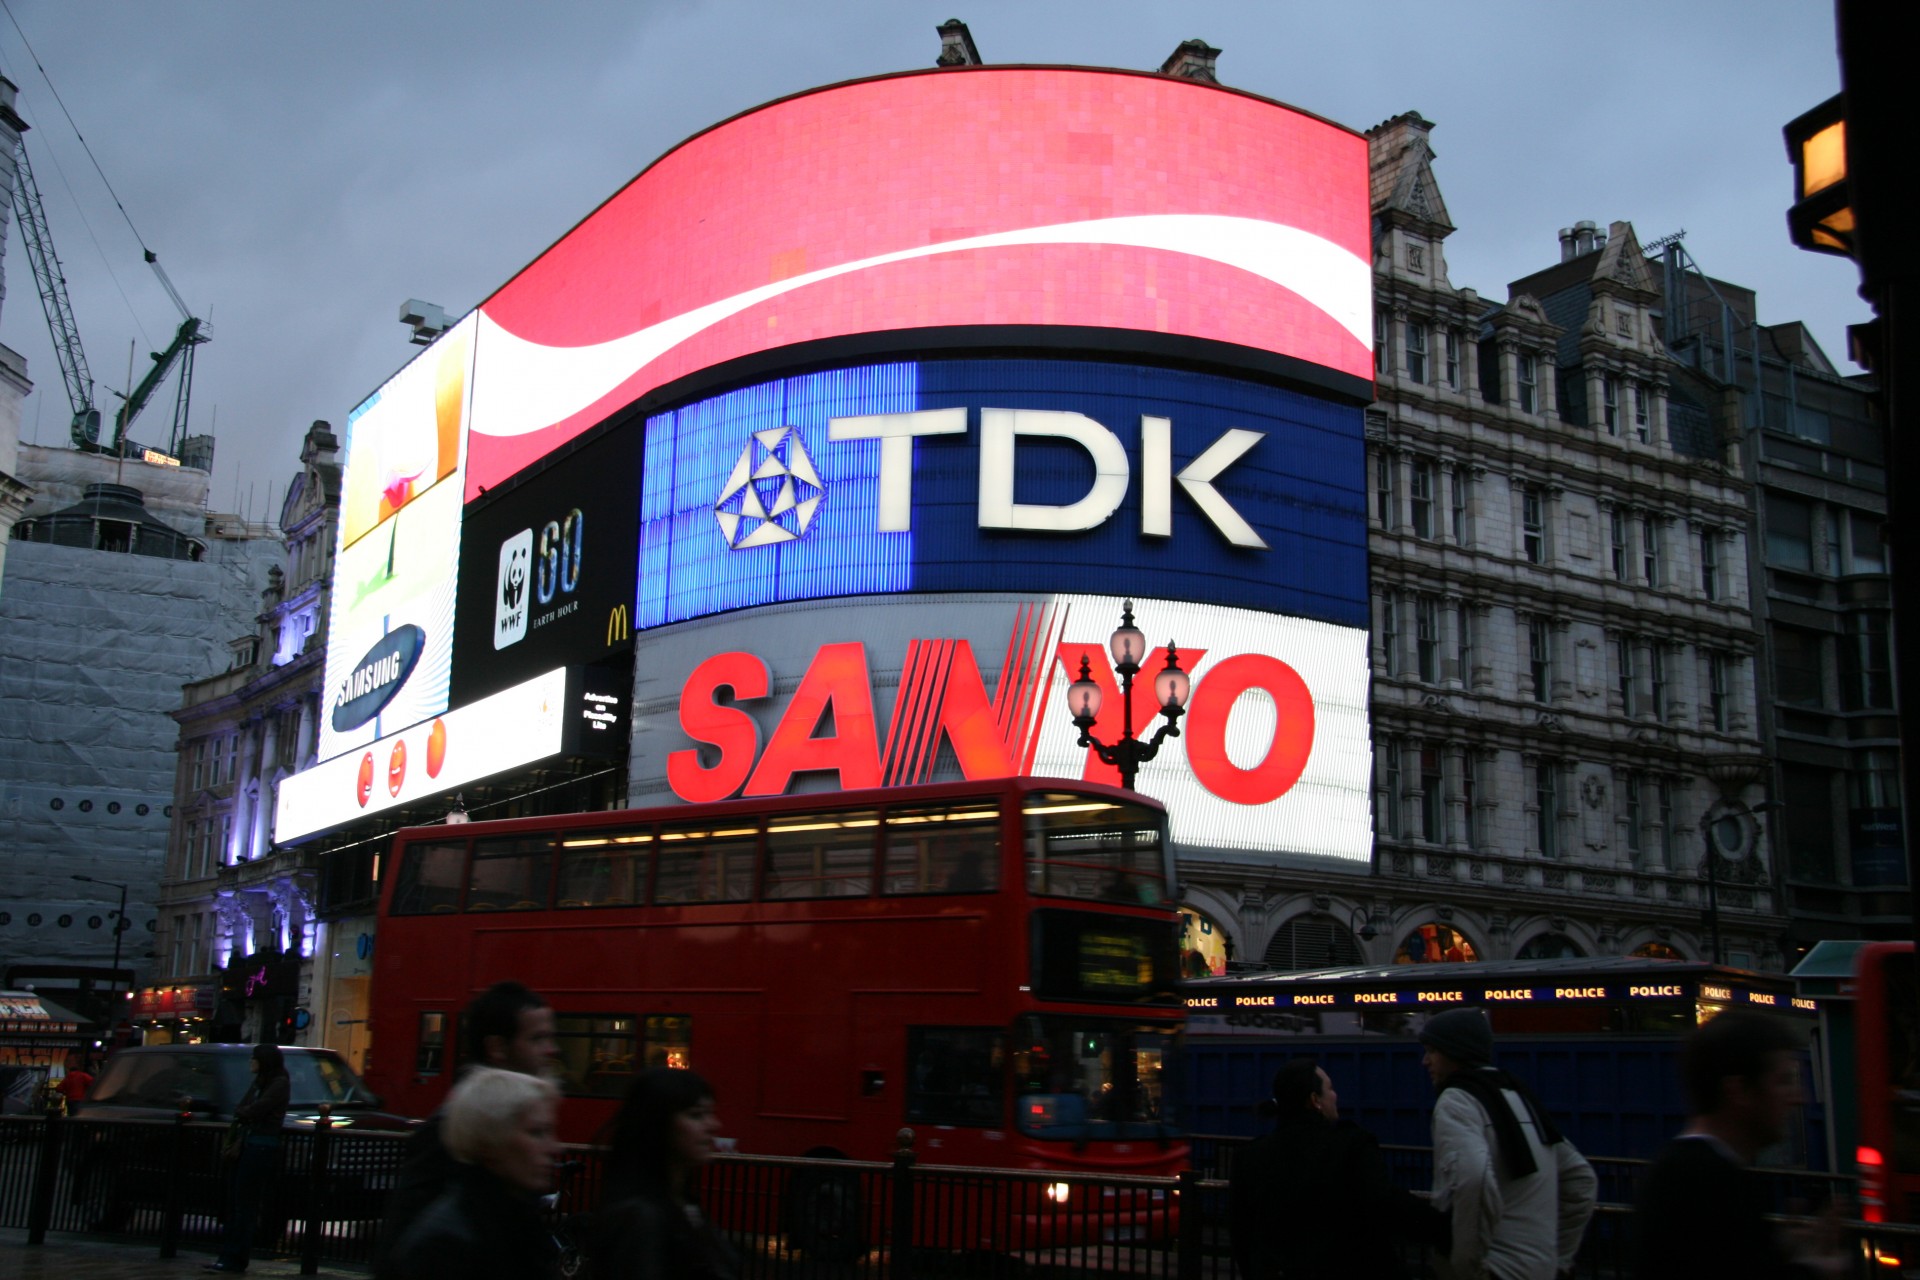 london piccadilly circus free photo